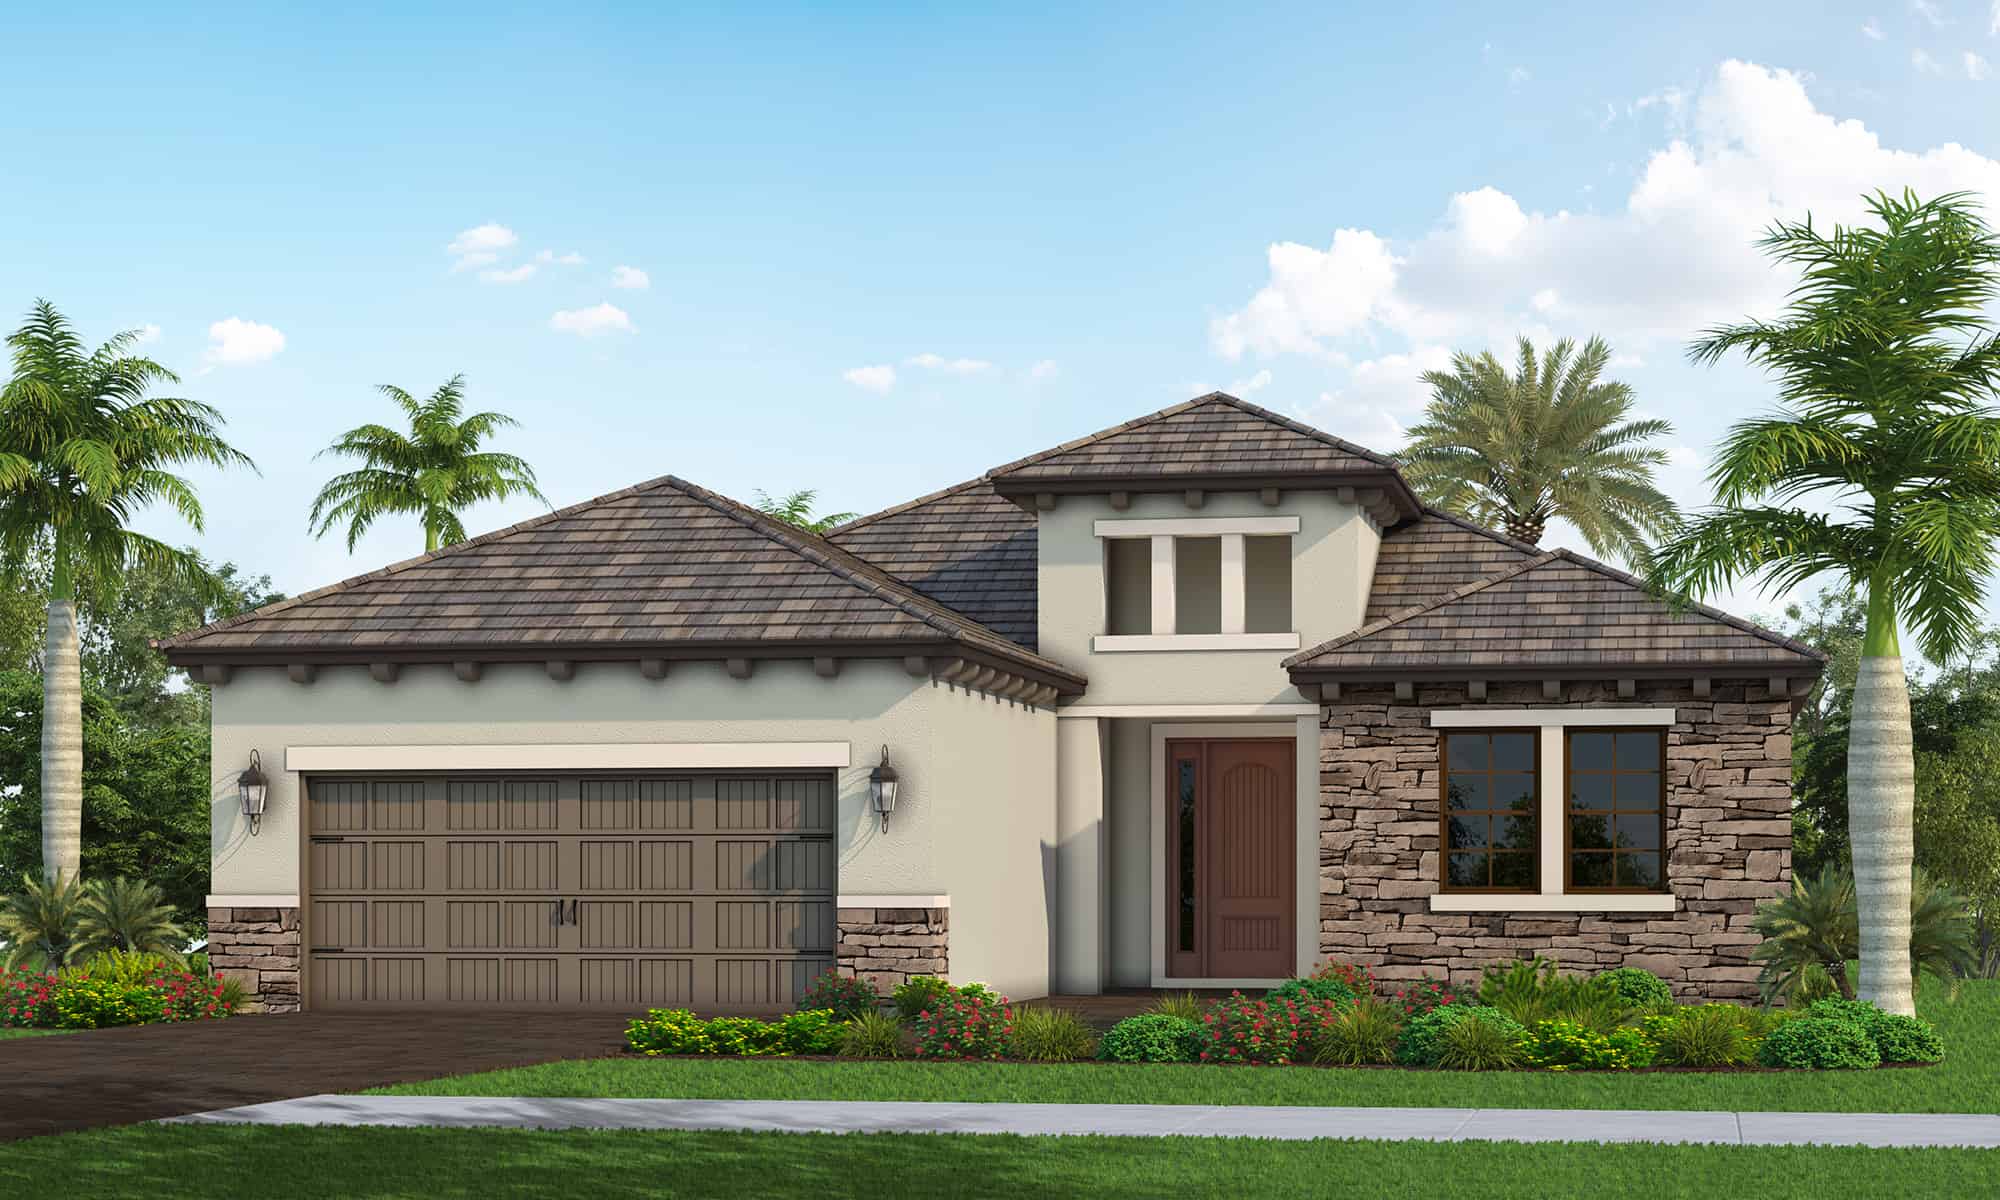 Exterior rendering of Harvest NealLand single-family home by Neal Communities